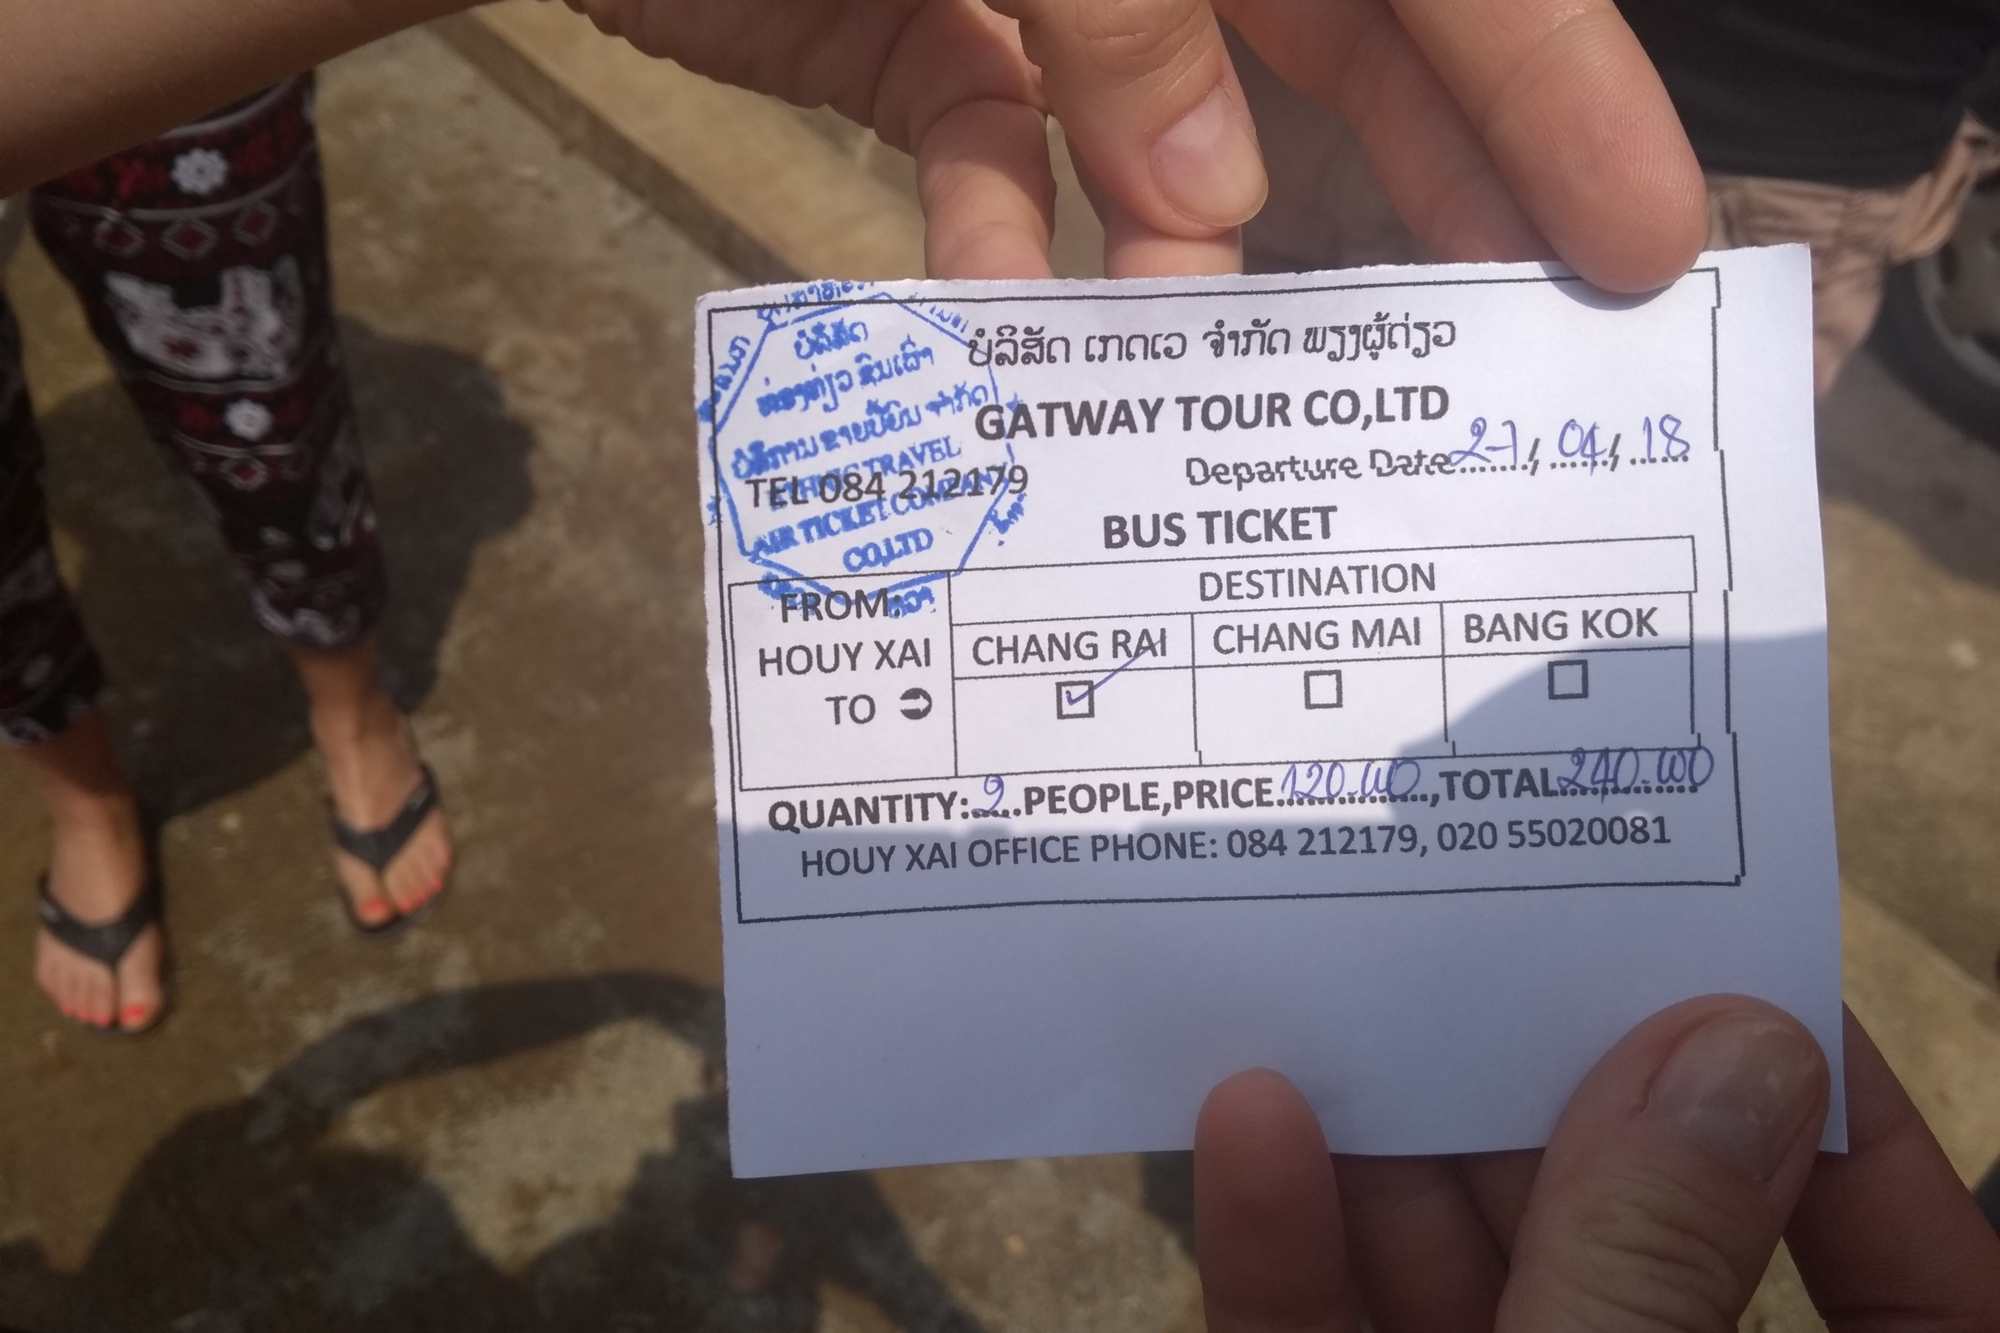 Our ticket for a bus to Chiang Rai